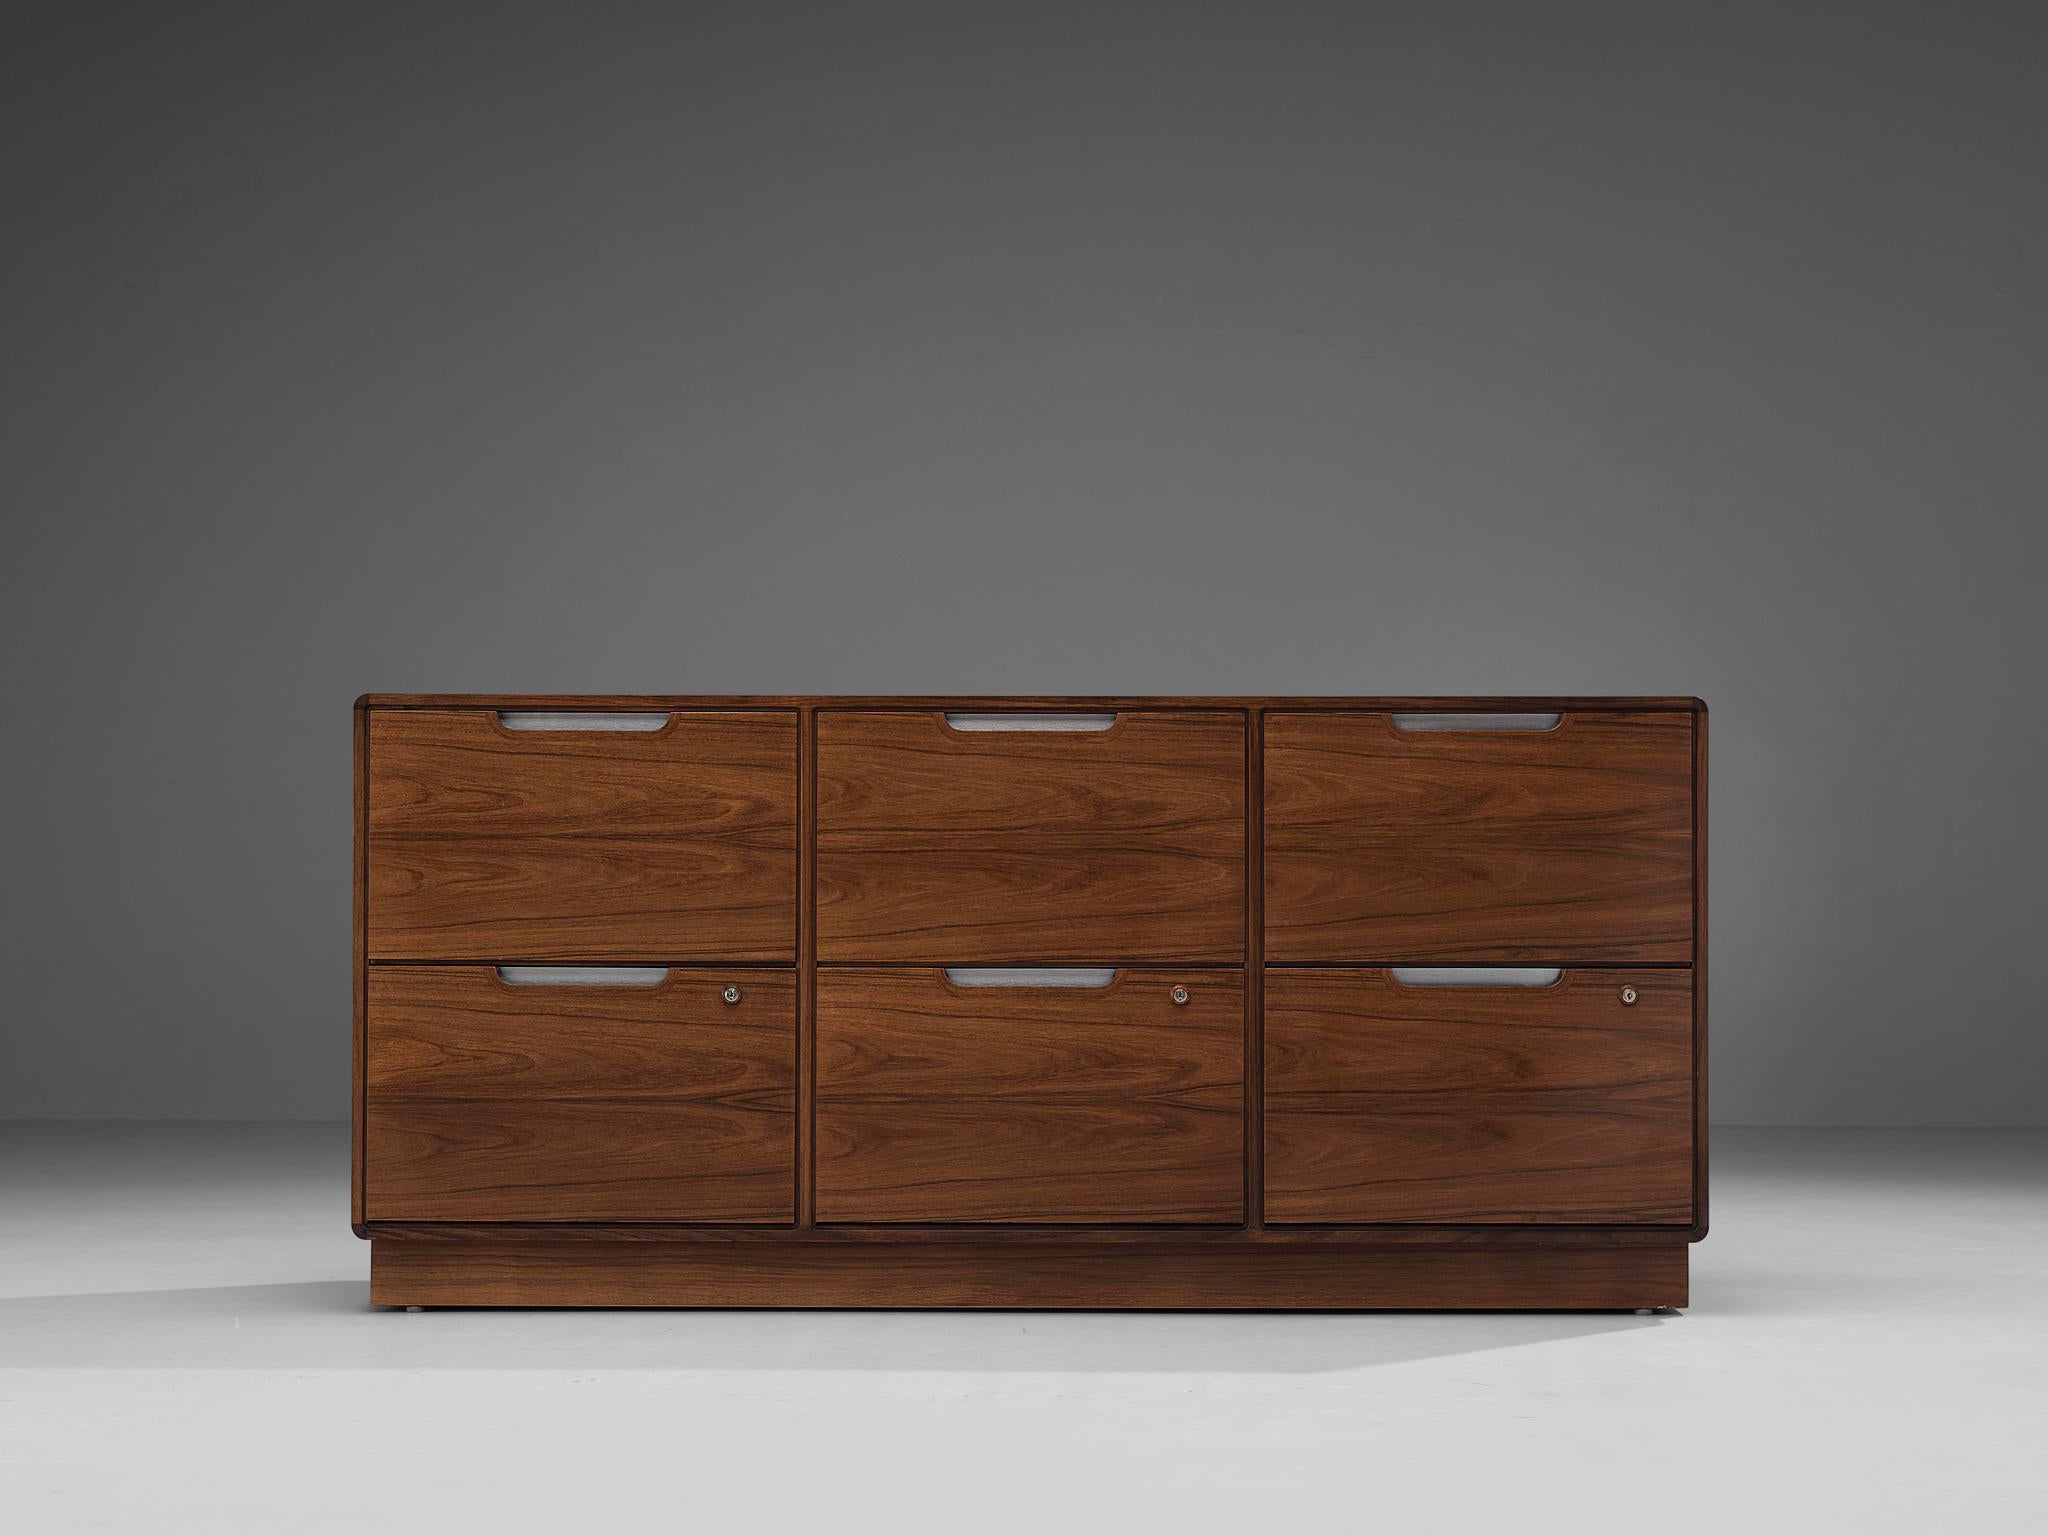 Posborg & Meyhoff for Sibast Møbler, cabinet, pau ferro and steel, Denmark, 1960s

This great cabinet is potentially the most beautiful way to organize your files, or to store your items. The pau ferro wood used for this piece, has a beautiful